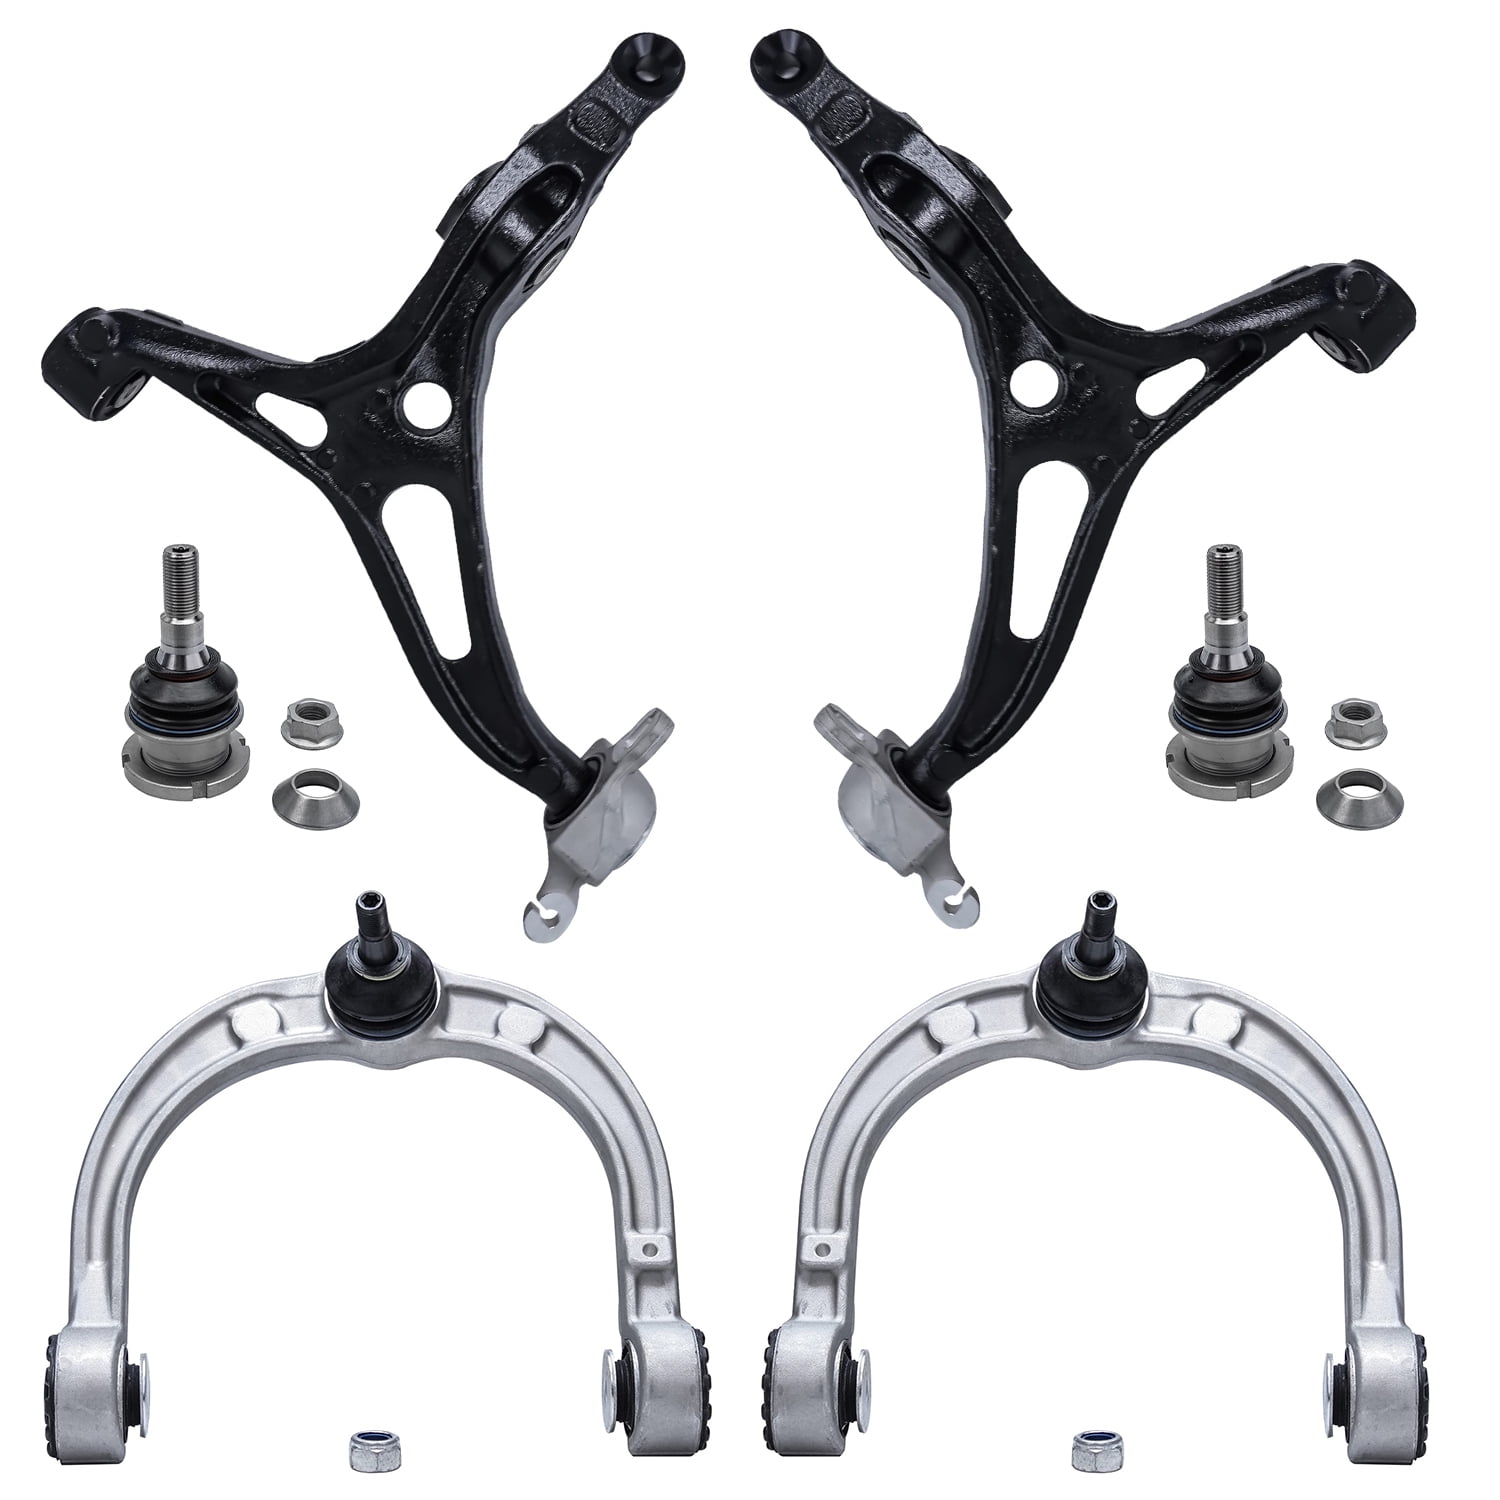 Detroit Axle - Front Upper Control Arms Kit for 2006-2010 Ford